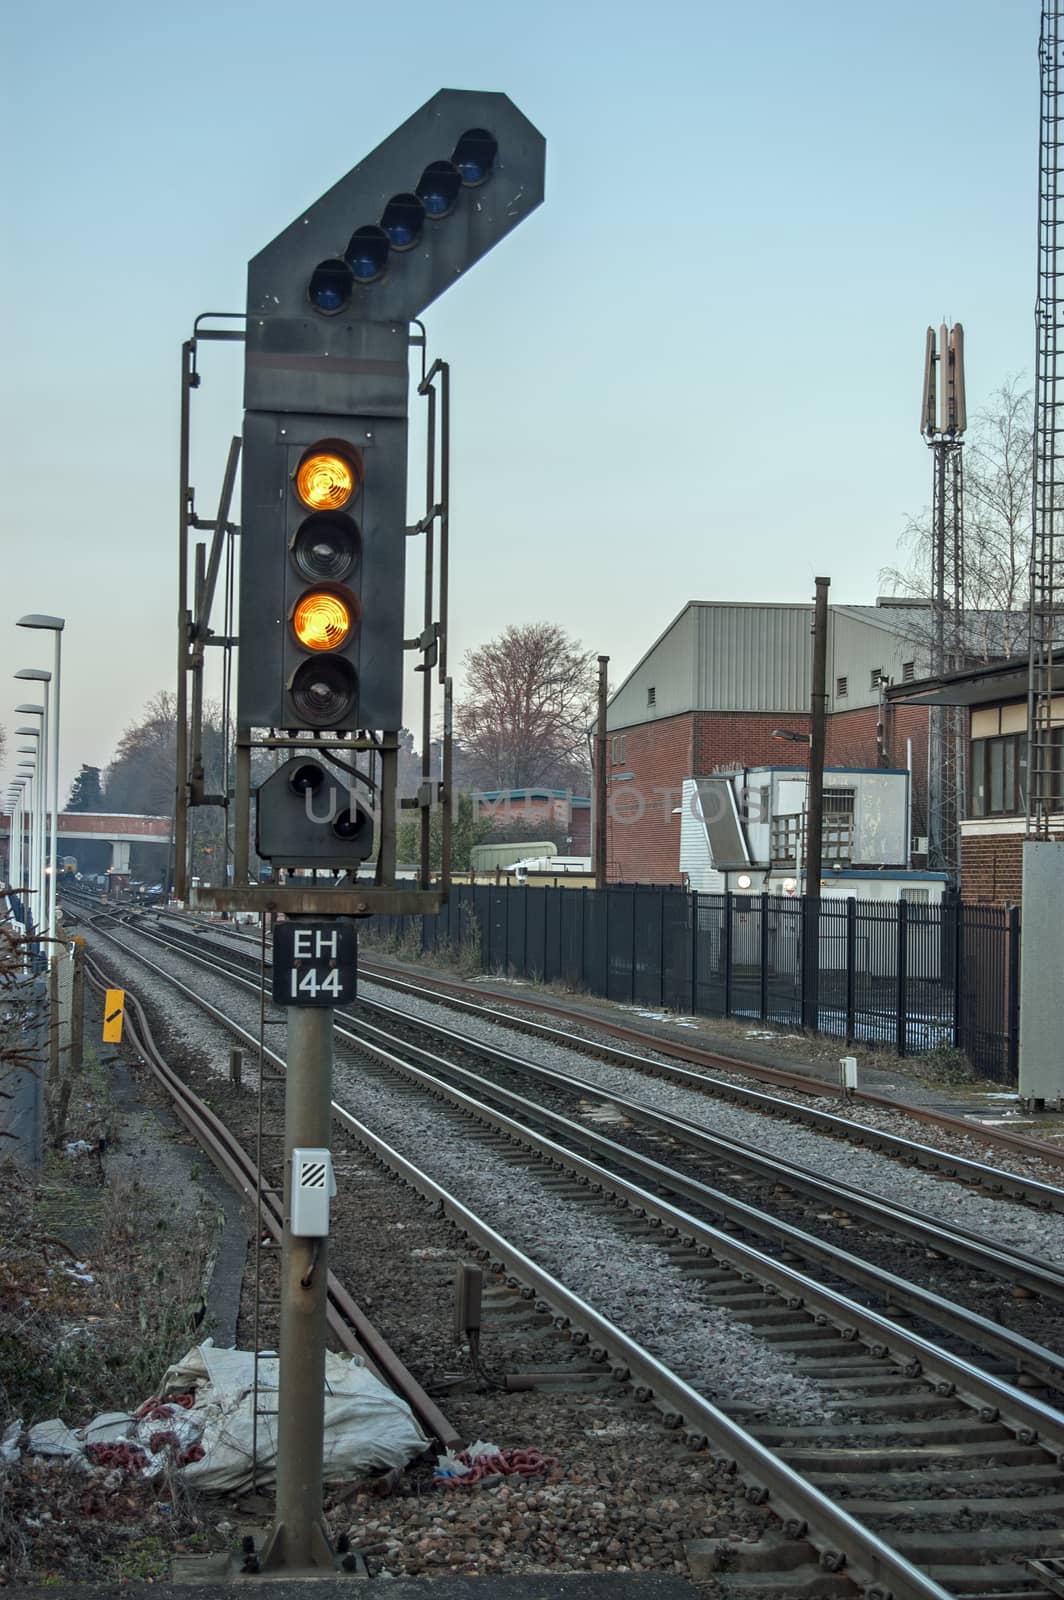 Double yellow railway signal on train track in UK by BasPhoto